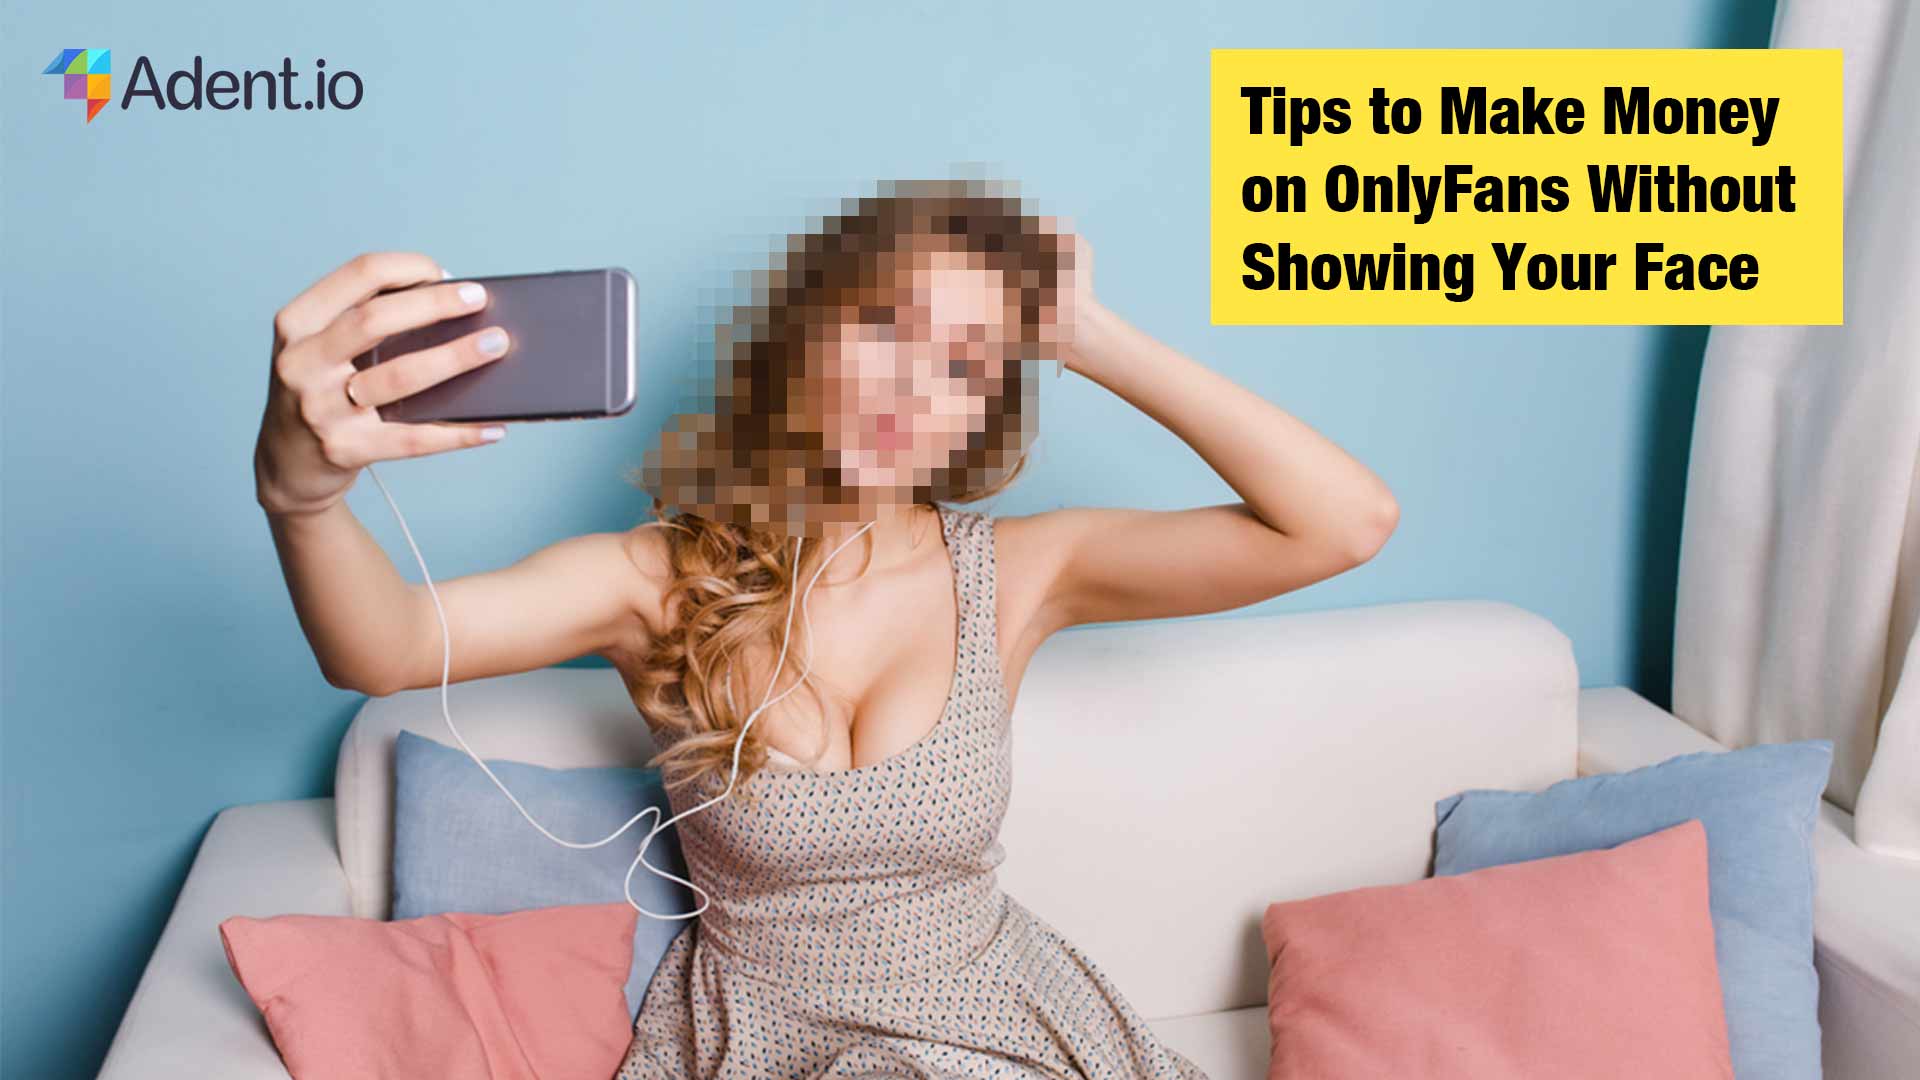 Tips to Make Money on OnlyFans Without Showing Your Face